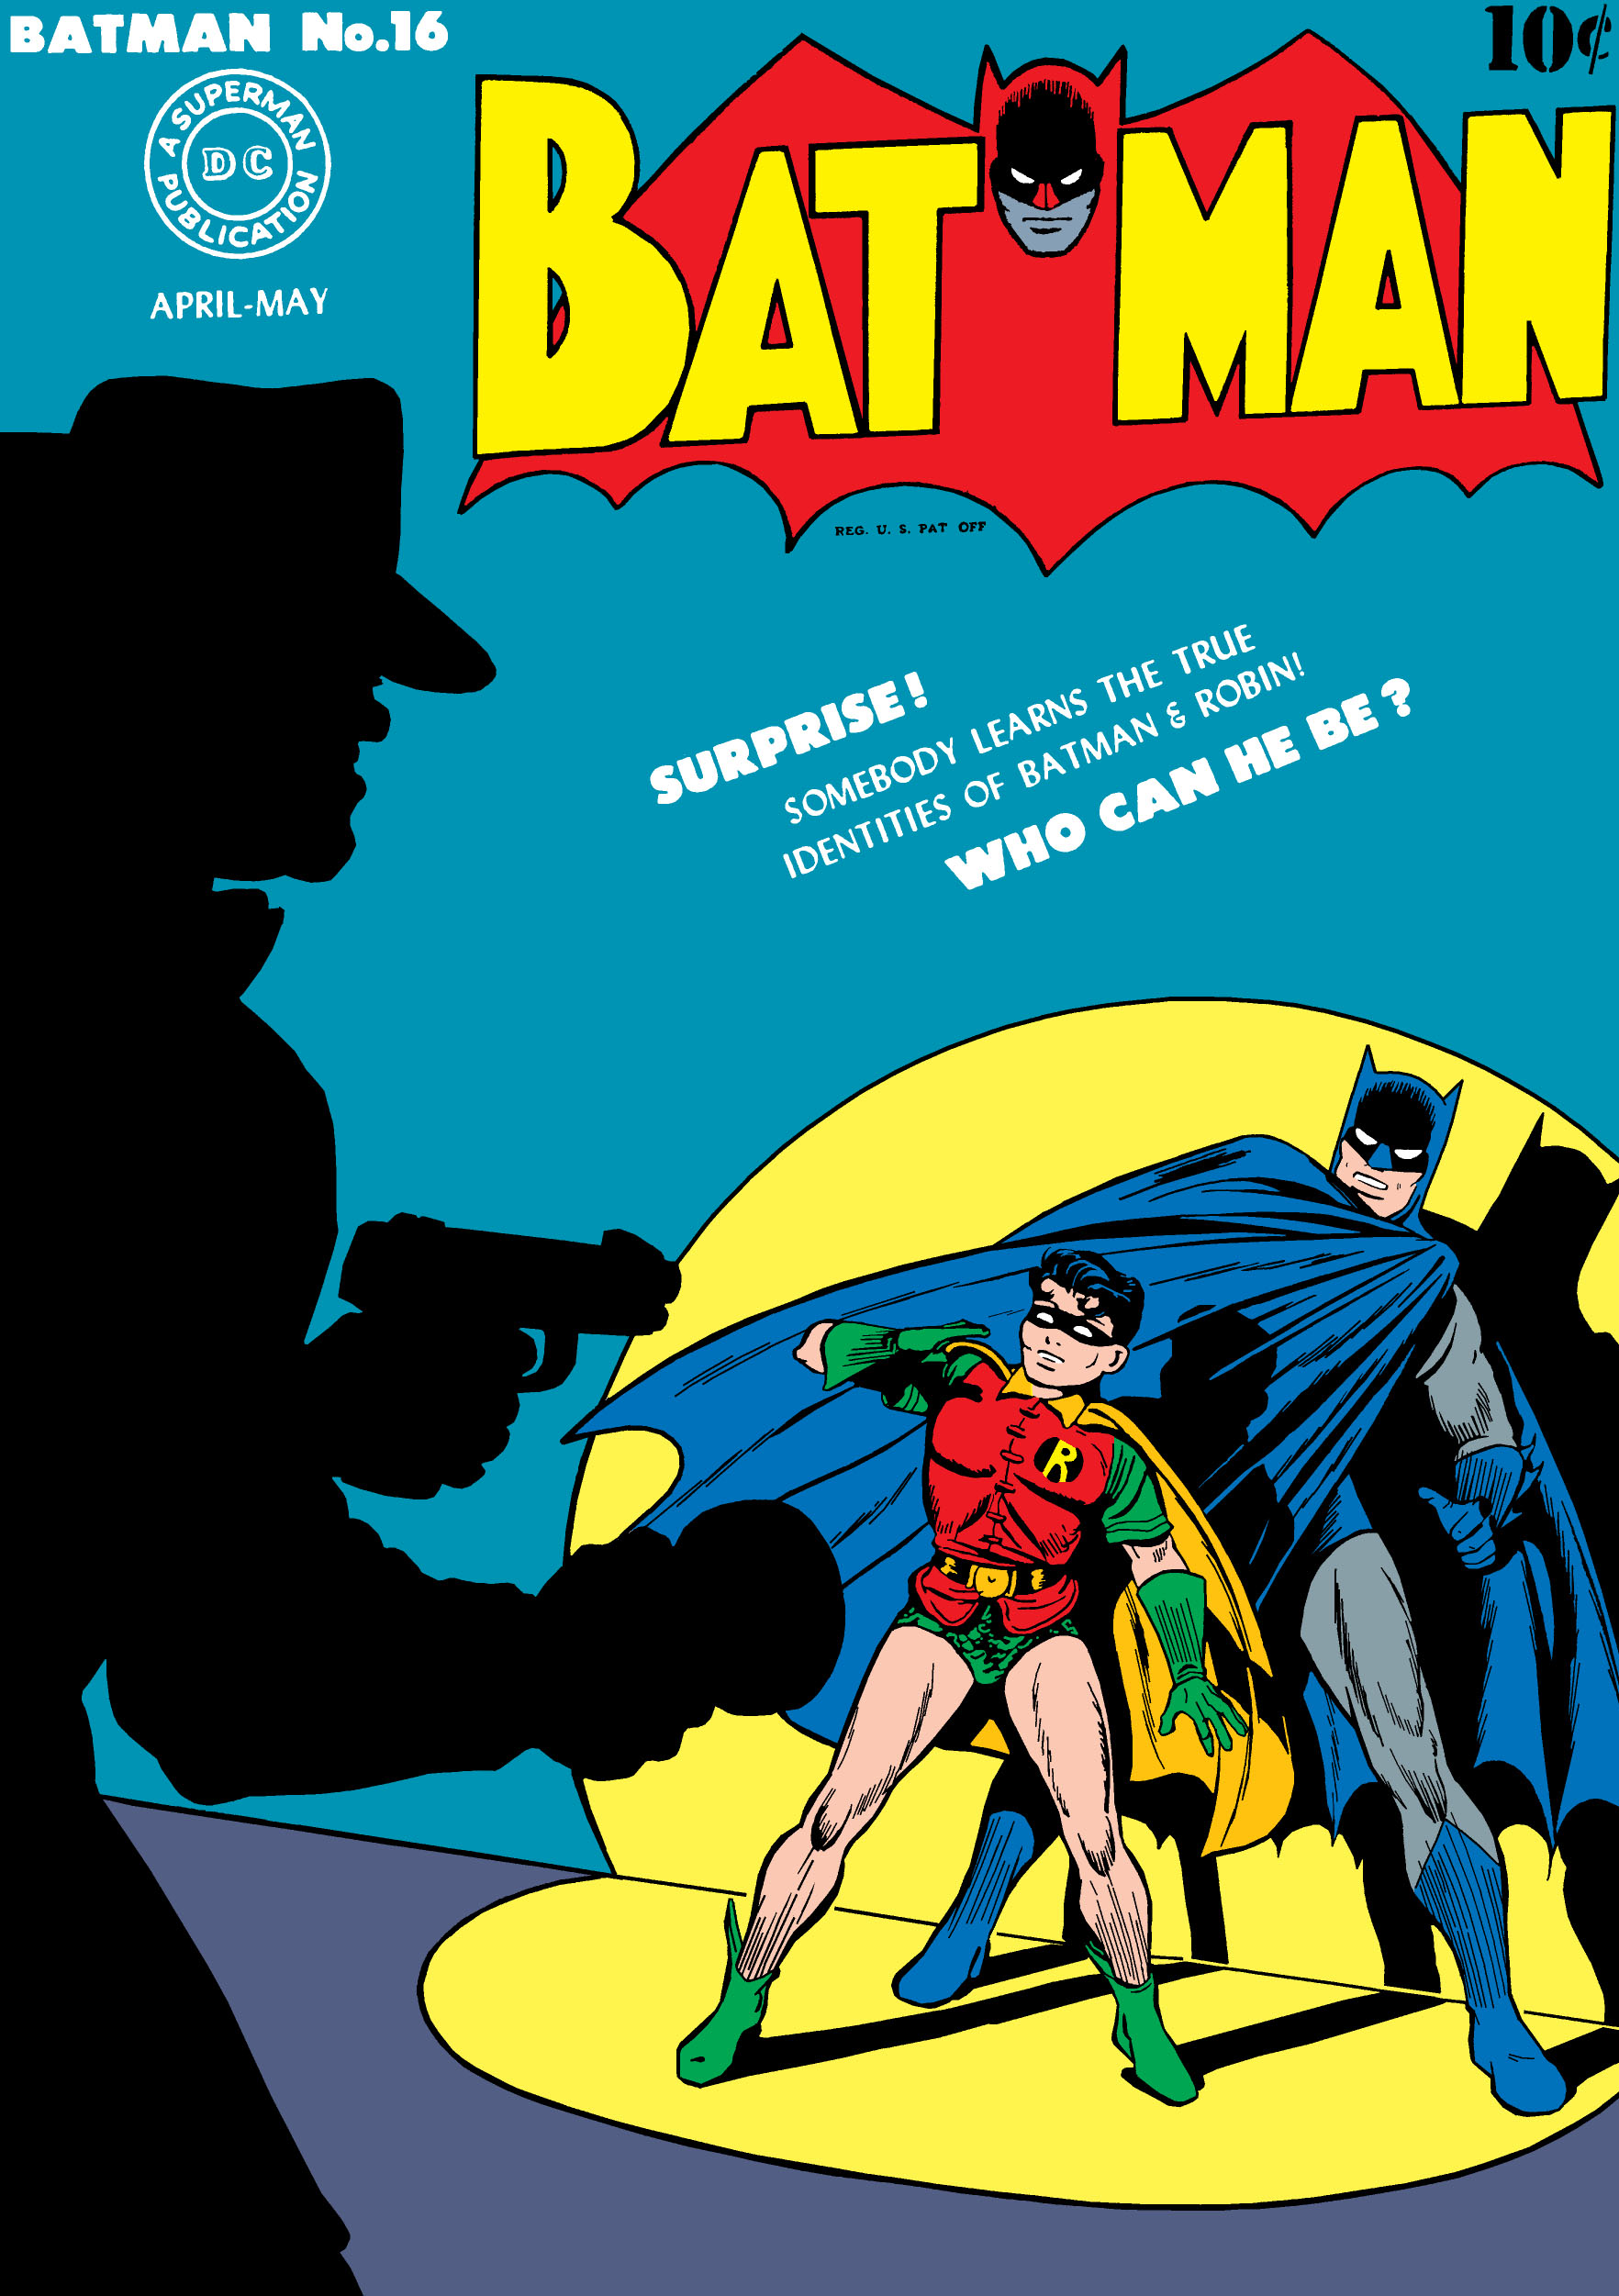 Batman 1940 Issue 16 | Read Batman 1940 Issue 16 comic online in high  quality. Read Full Comic online for free - Read comics online in high  quality .|